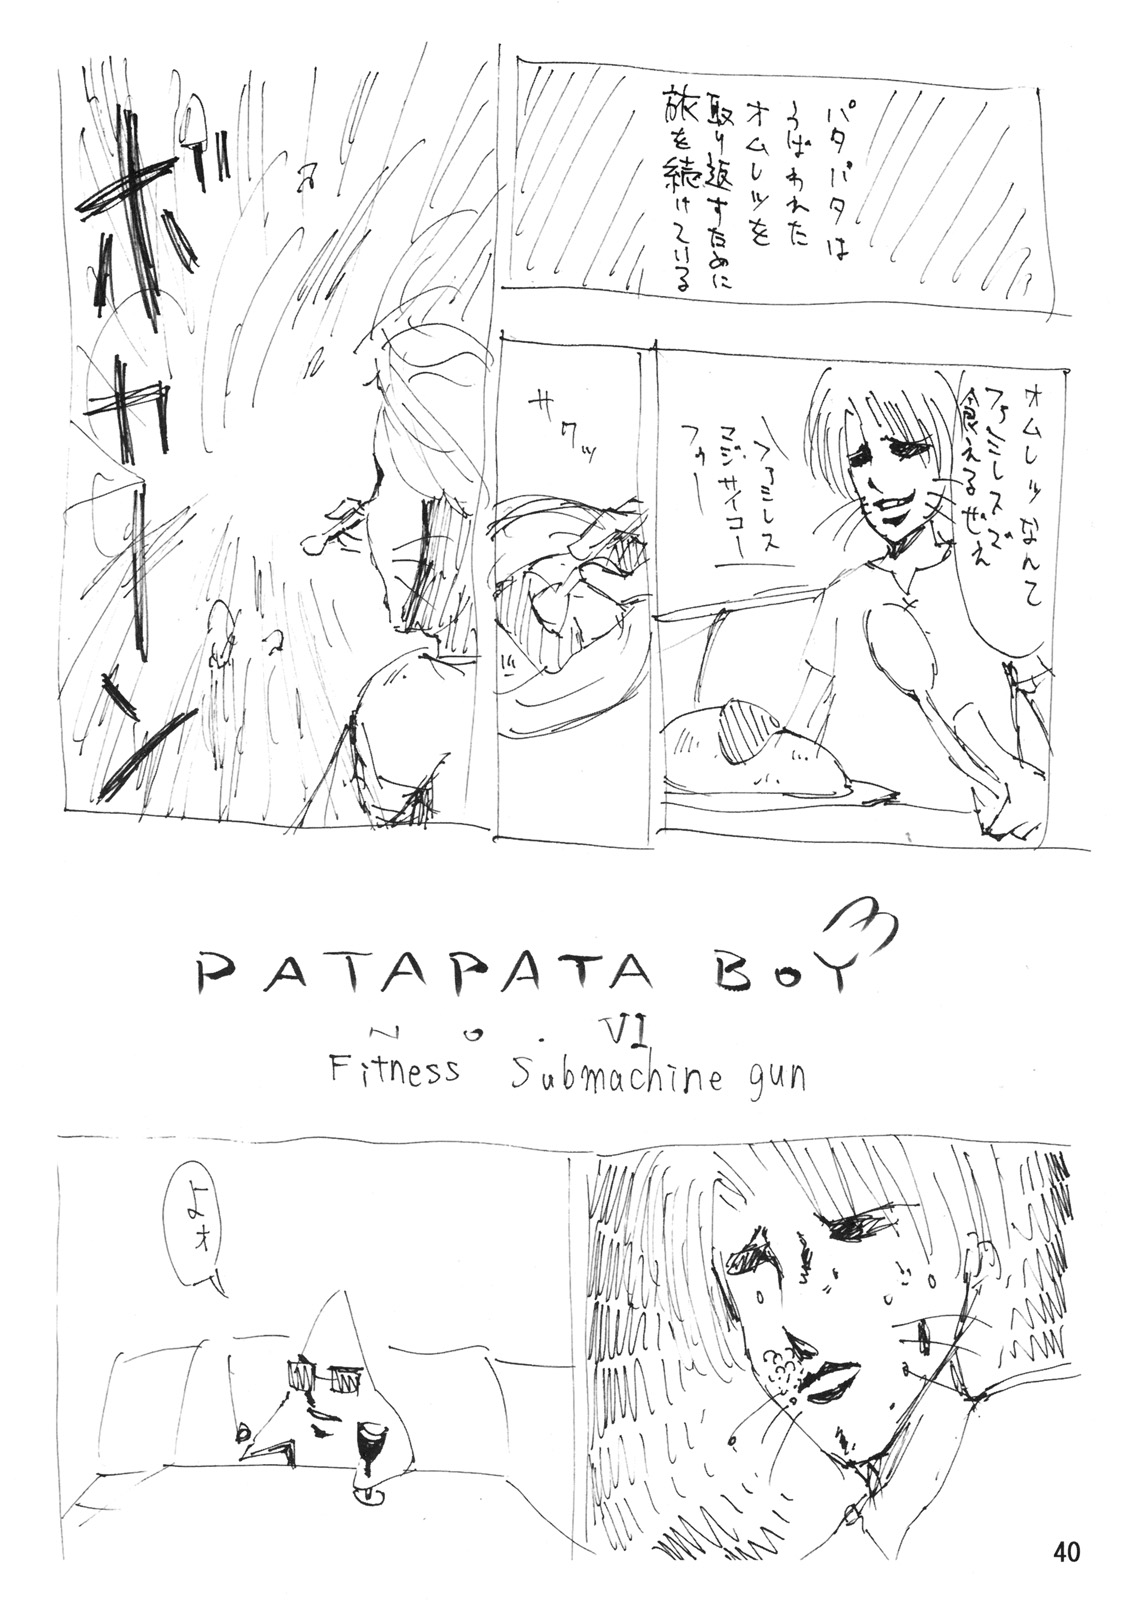 [3g (Junkie)] DOF Mai (King of Fighters) page 39 full